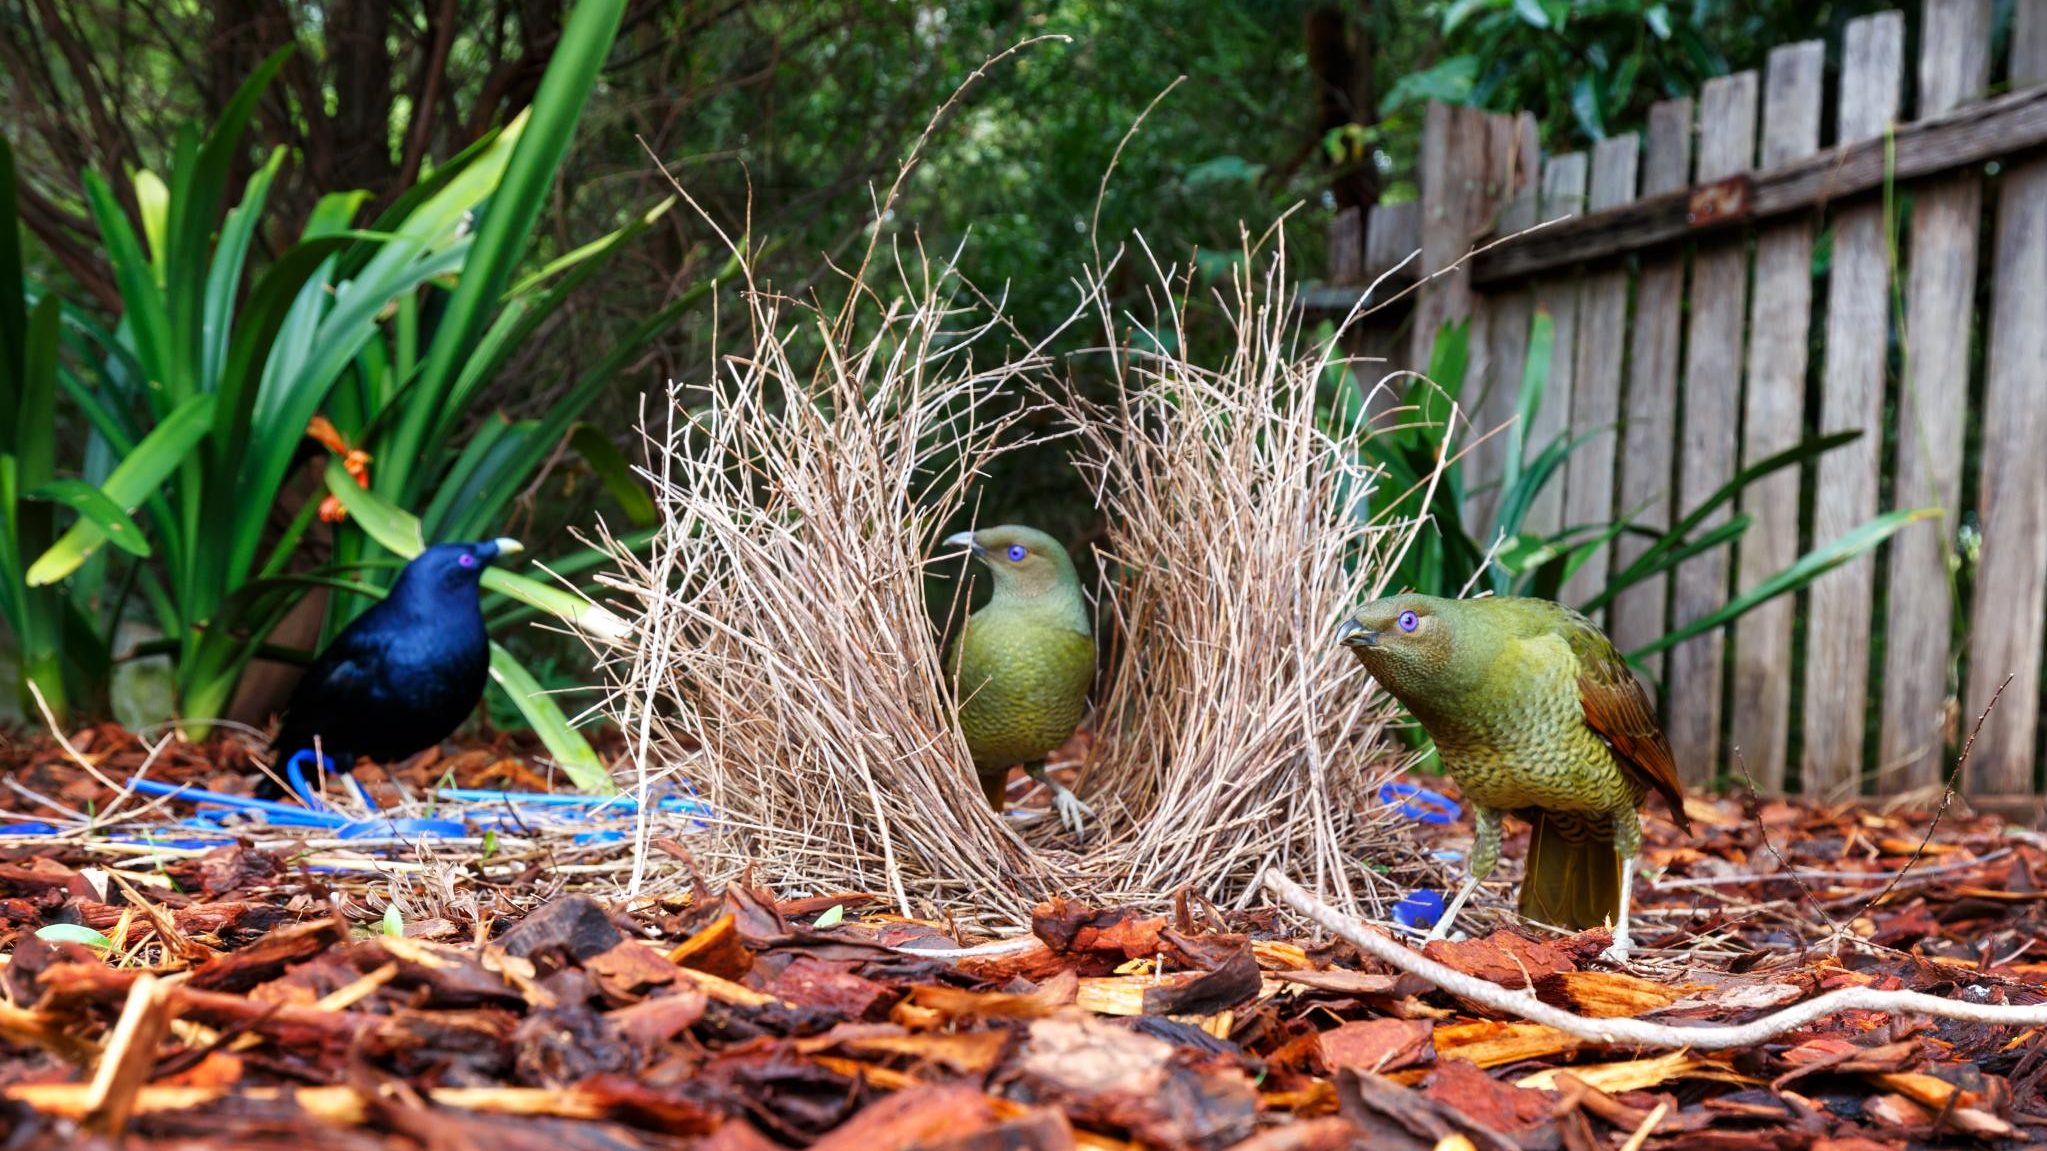 two green birds around a stick bower while a dark birds looks on